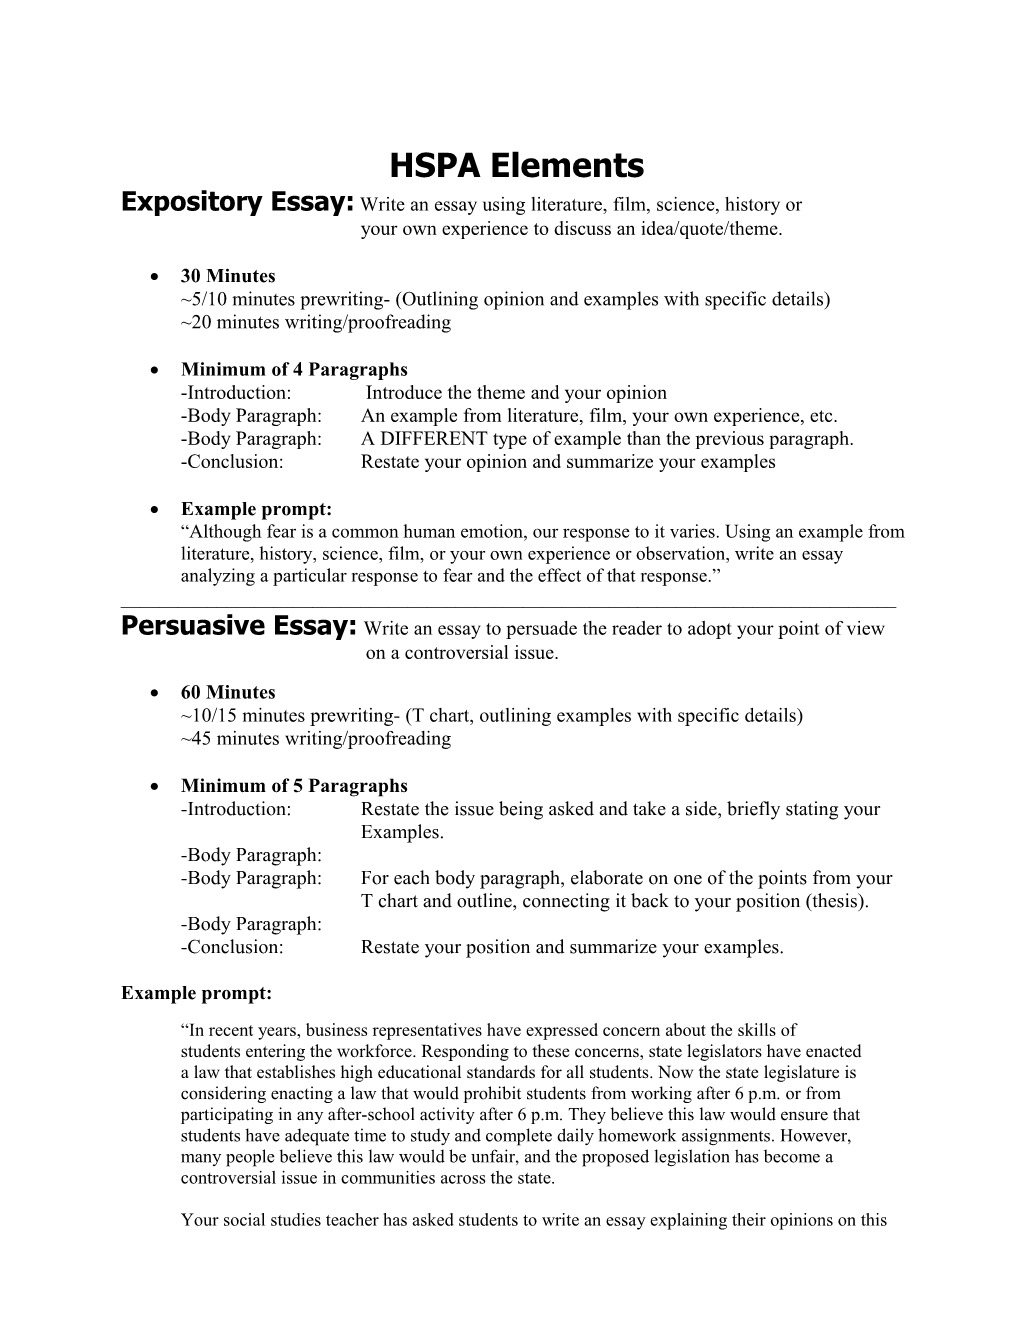 Expository Essay: Write an Essay Using Literature, Film, Science, History Or